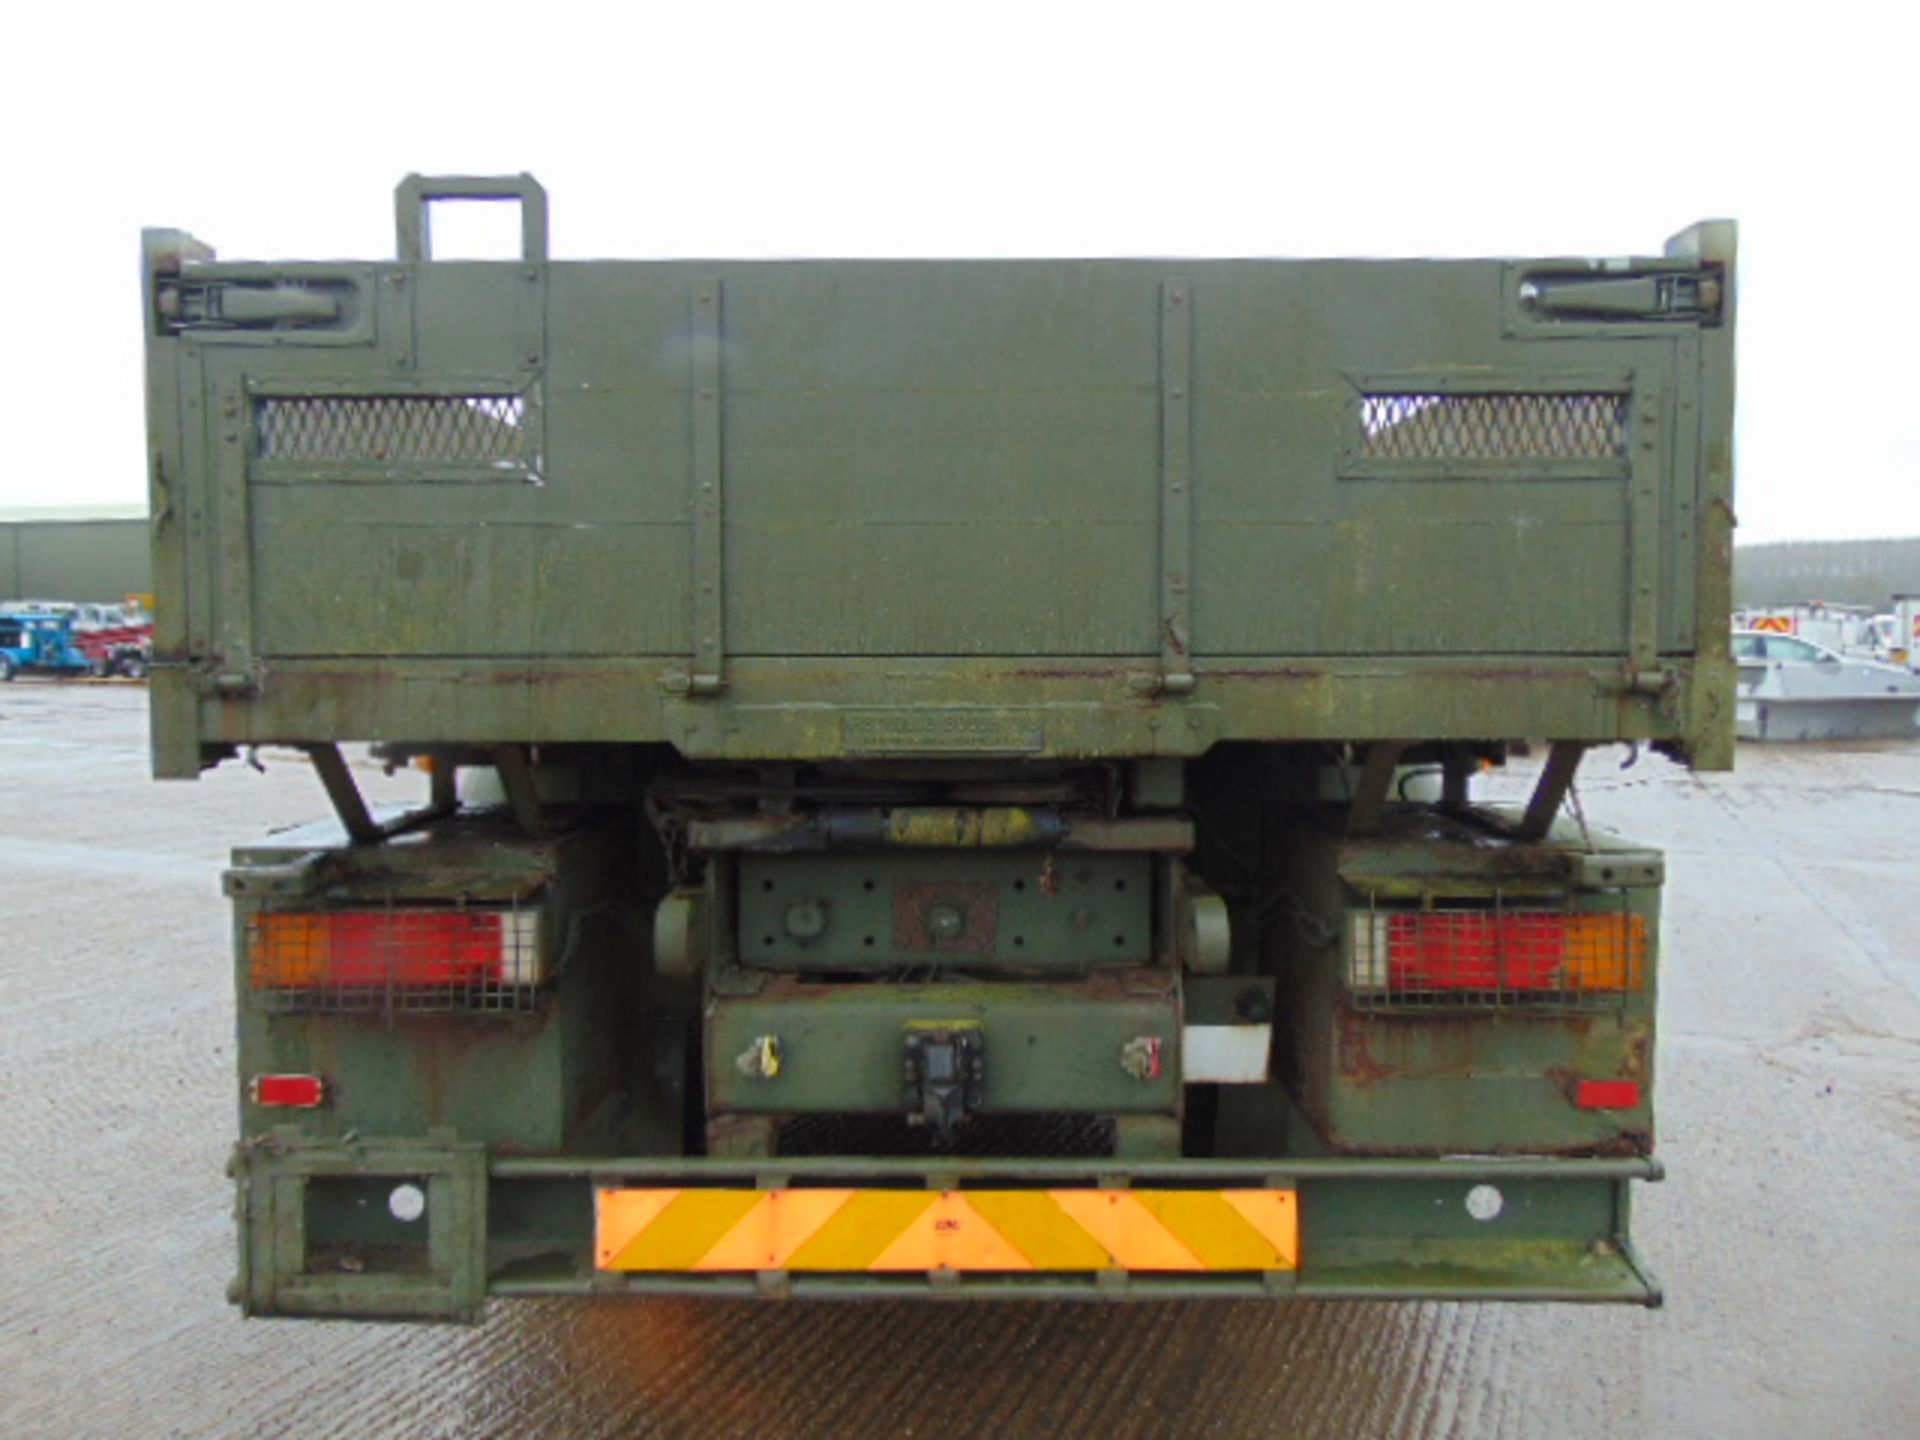 Renault G300 Maxter RHD 4x4 8T Cargo Truck with Fitted Winch - Image 6 of 17